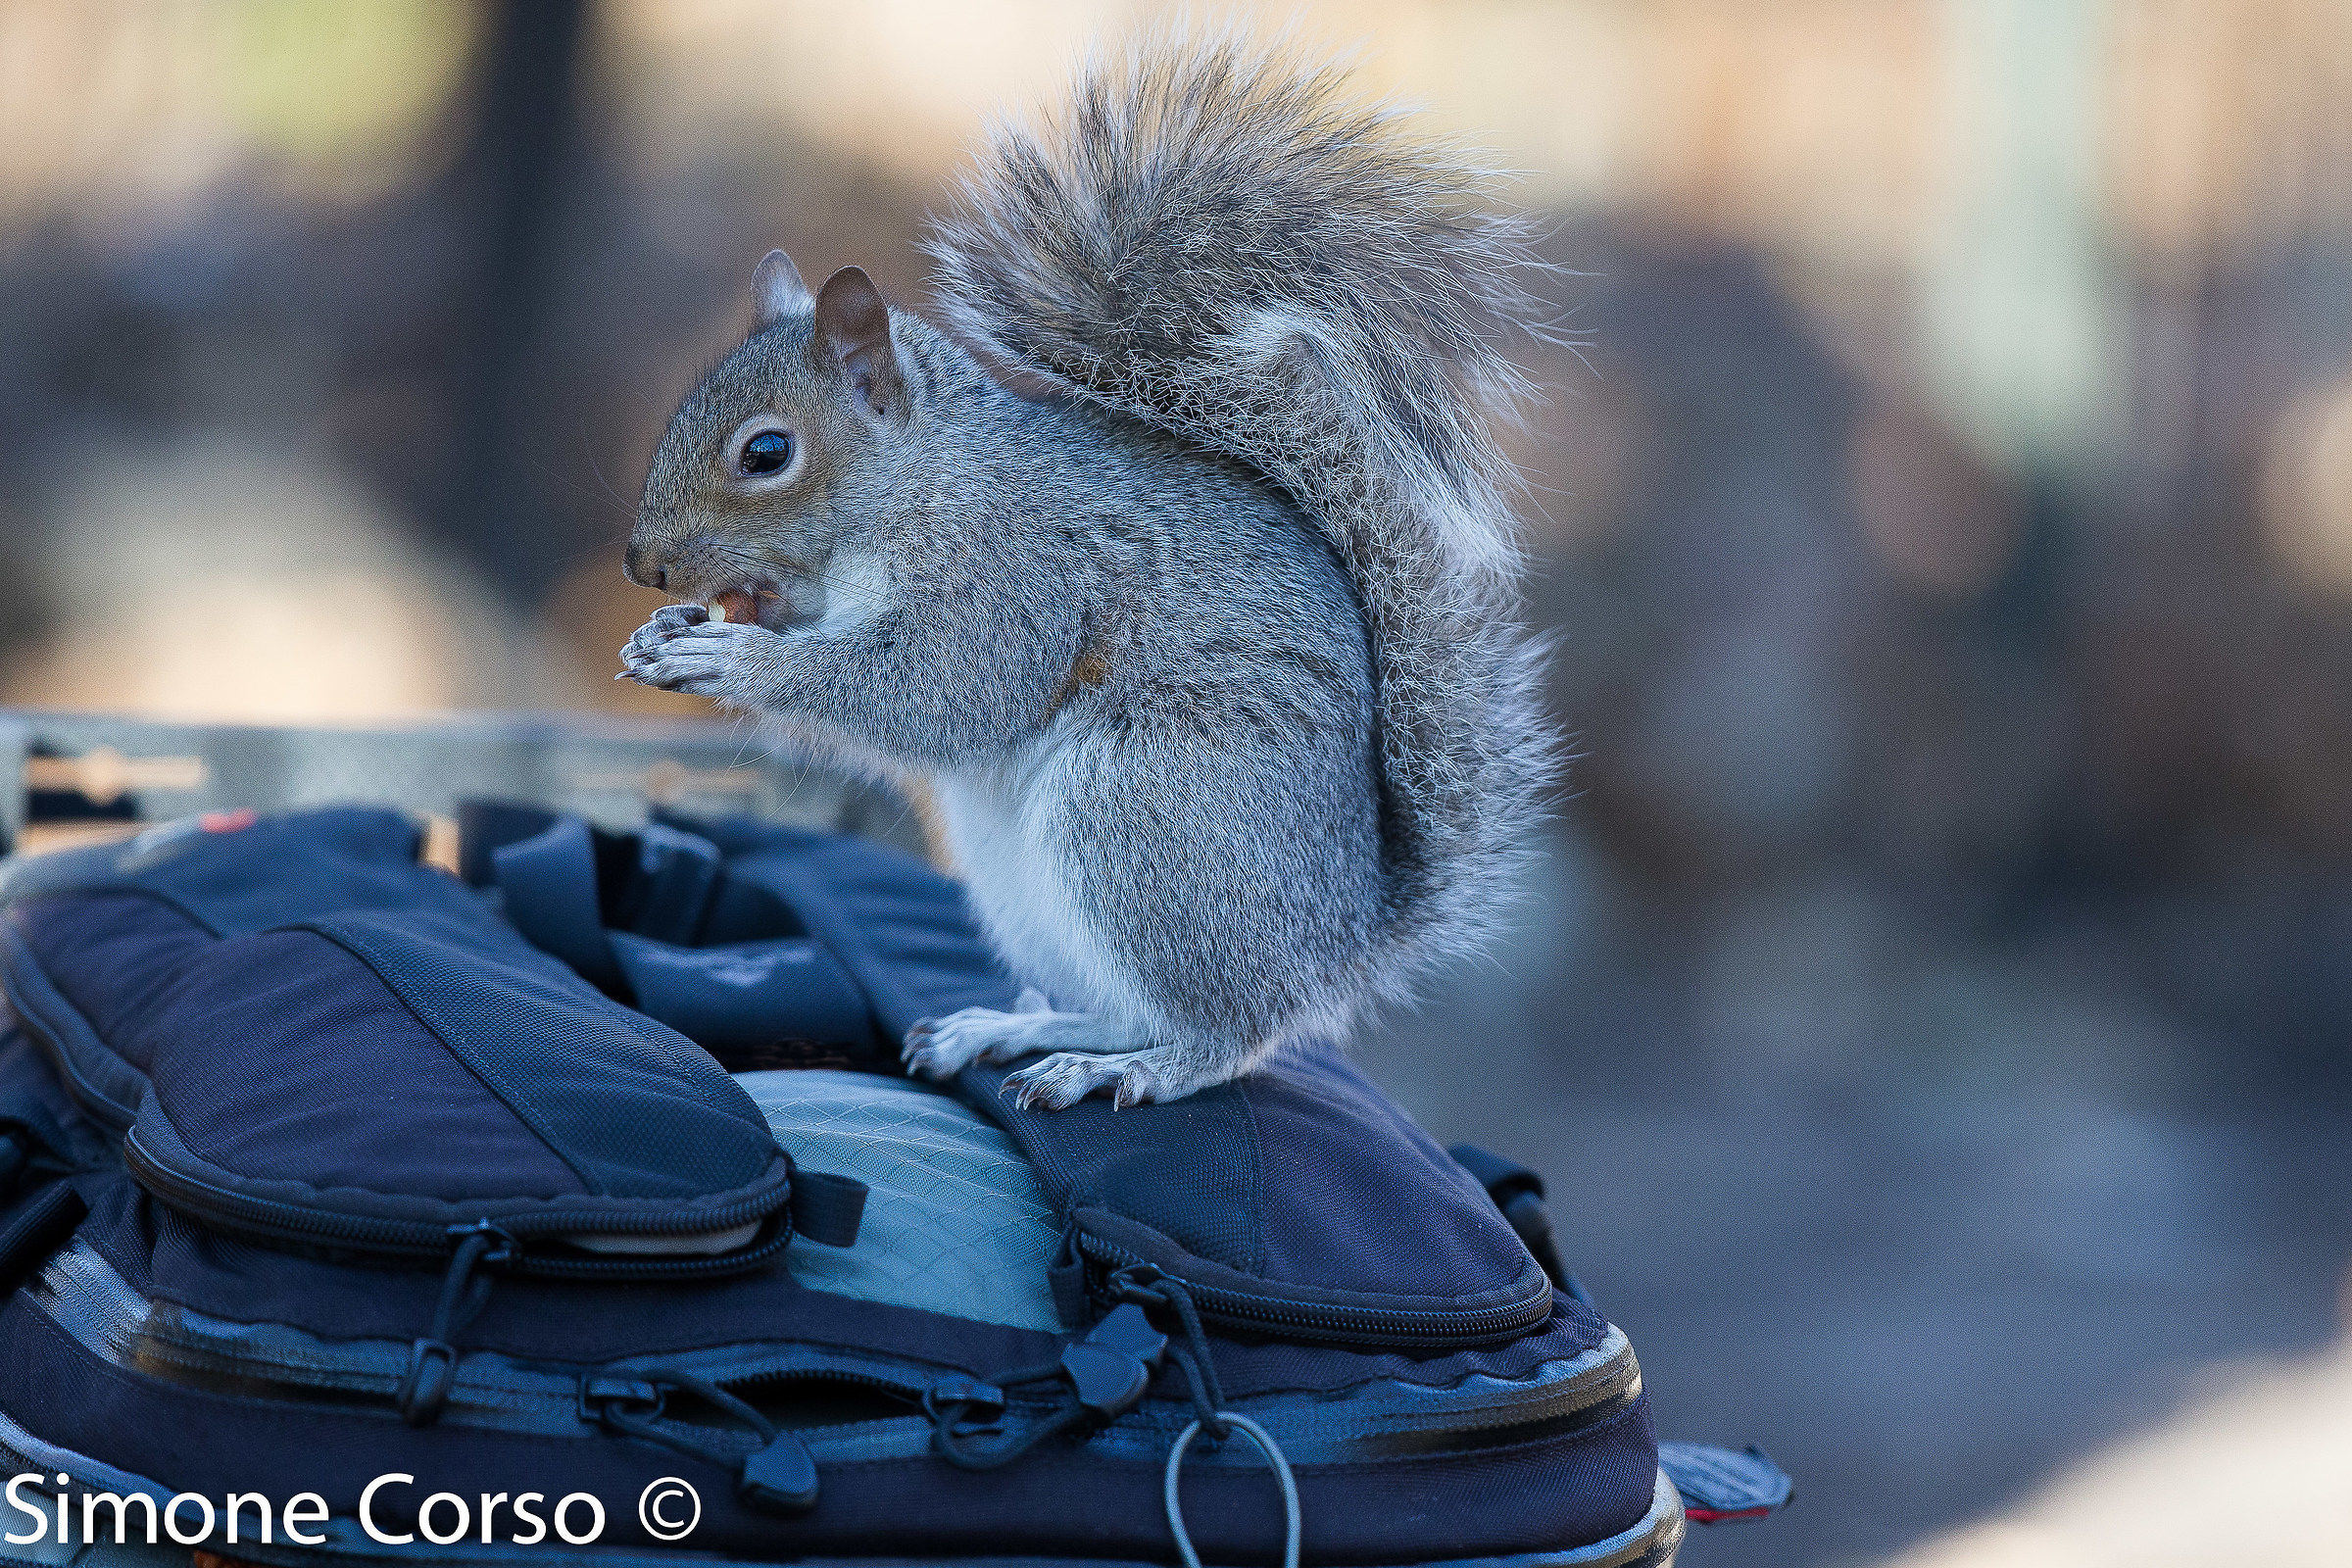 The squirrel and my backpack...